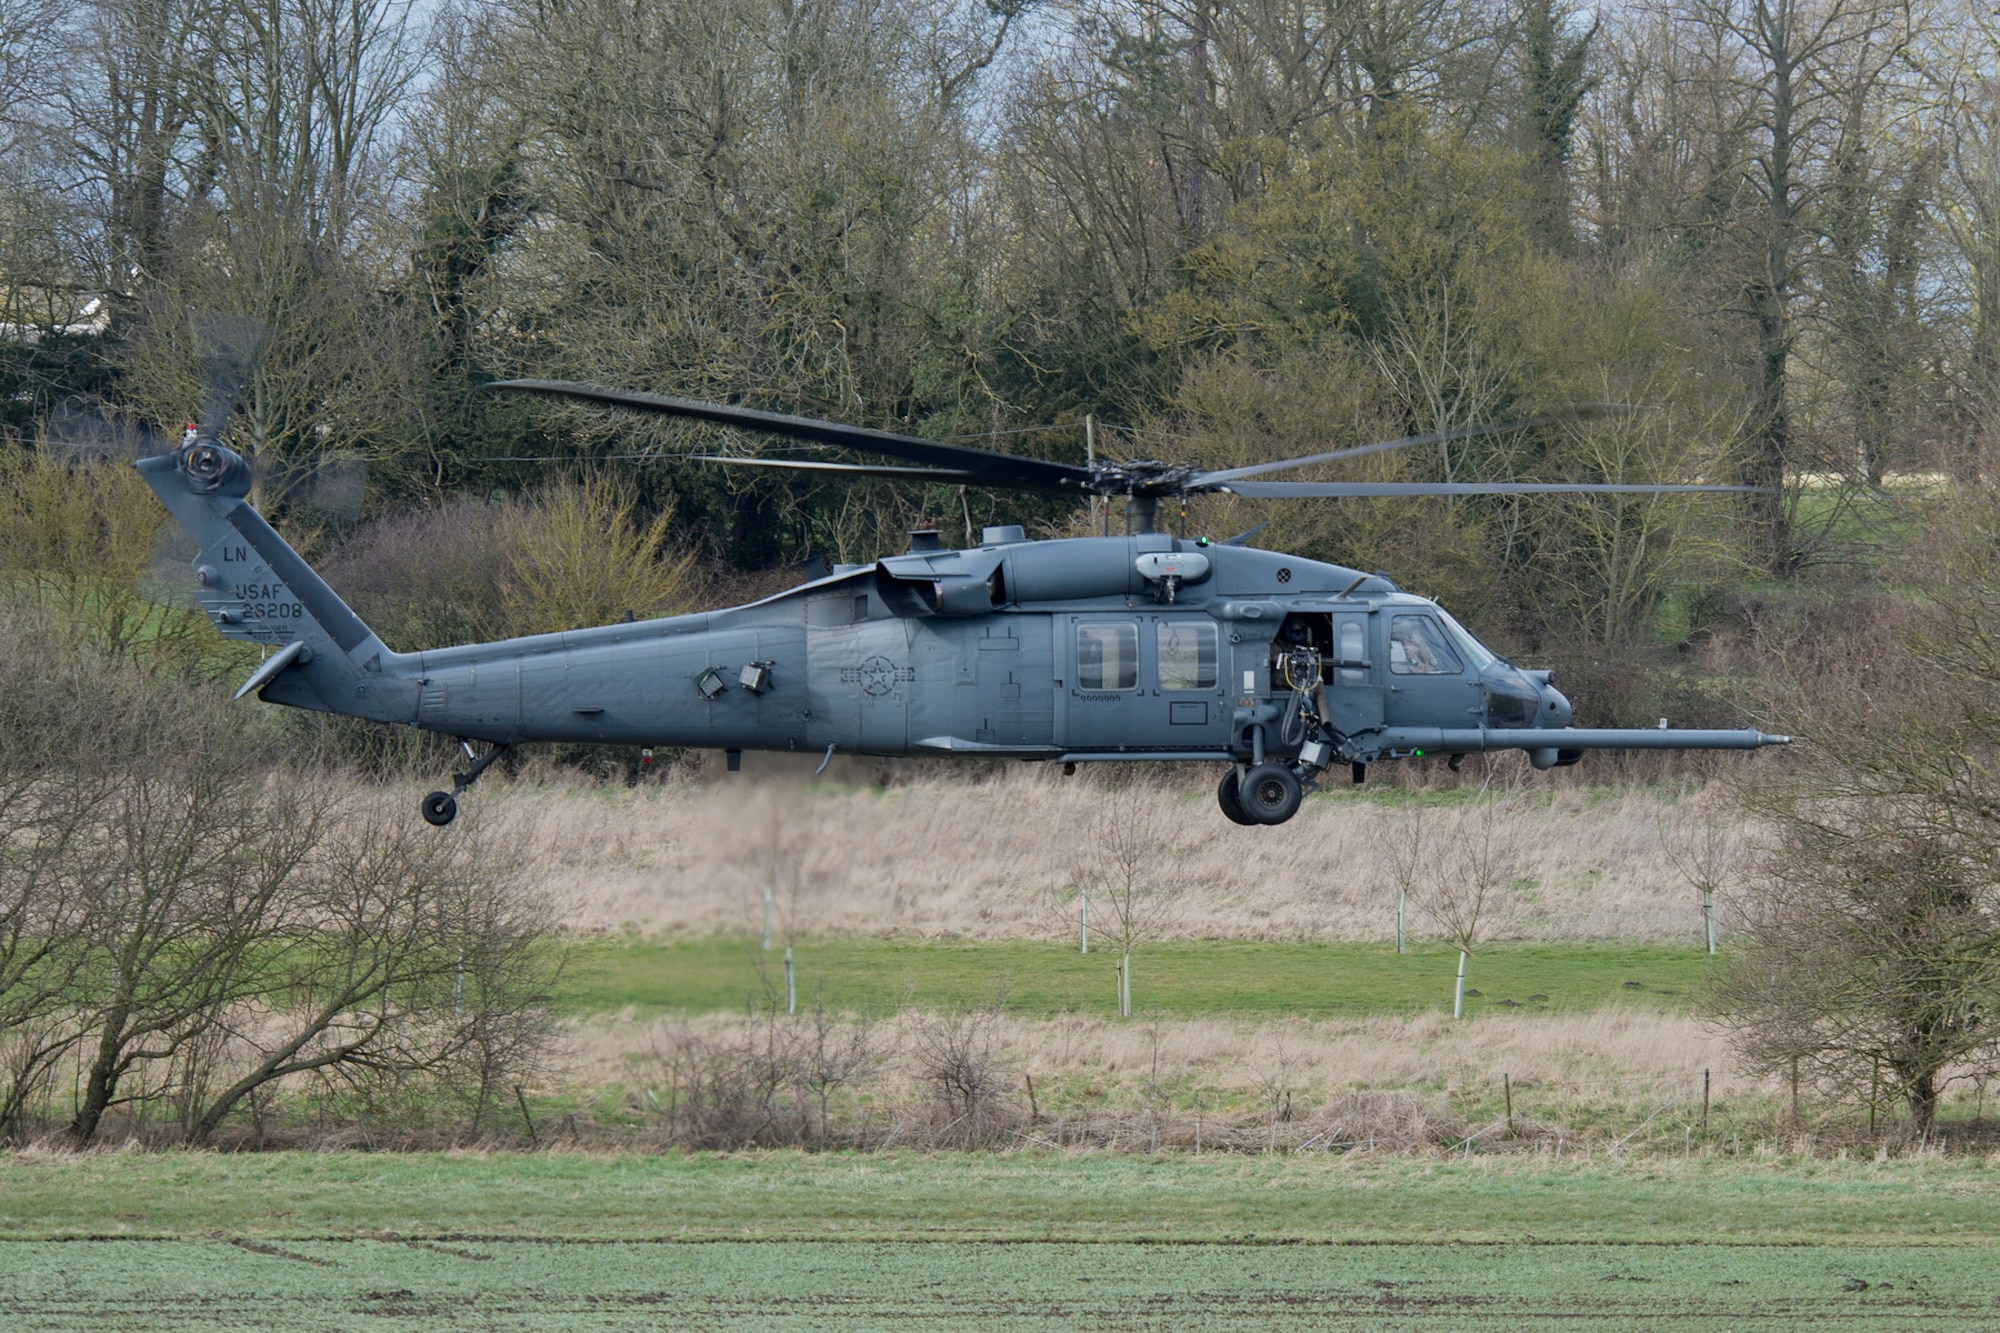 A 48th Fighter Wing HH-60G Pave Hawk clears an area during combat search and rescue training March 5, 2015, in the hilly terrain of Hinderclay, England. The training included Tornado GR4 pilots, Royal air force Regiment personnel and U.S. Air Force HH-60G aircrew. They worked together to suppress simulated enemies and make a successful recovery. (U.S. Air Force photo/Airman 1st Class Trevor T. McBride)